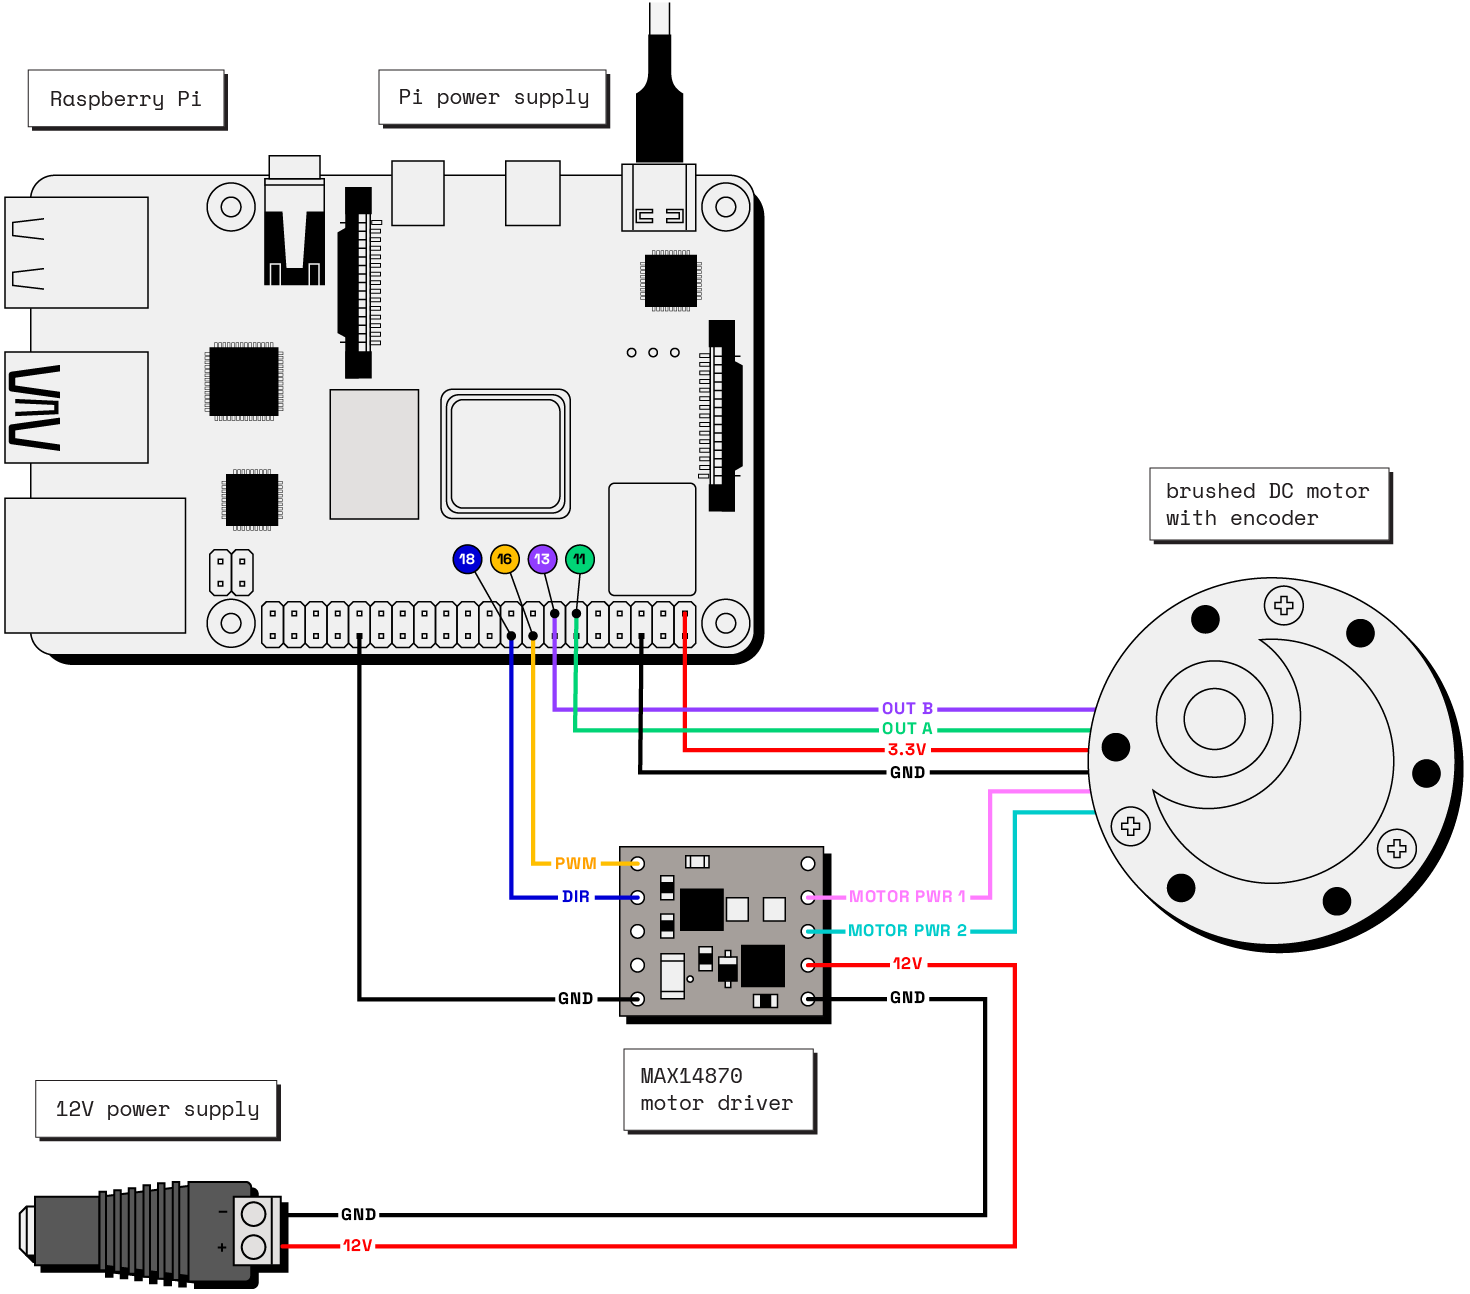 Example wiring diagram with a Raspberry Pi, brushed DC motor, 12V power supply, and Pololu MAX14870 motor driver. The DIR pin of the driver is wired to pin 18 on the Pi. PWM goes to pin 16. The motor’s encoder signal wires (out a and out b) go to pins 11 and 13 on the Pi. The motor’s main power wires are connected to the motor driver while its encoder logic power wires are connected to the Pi.